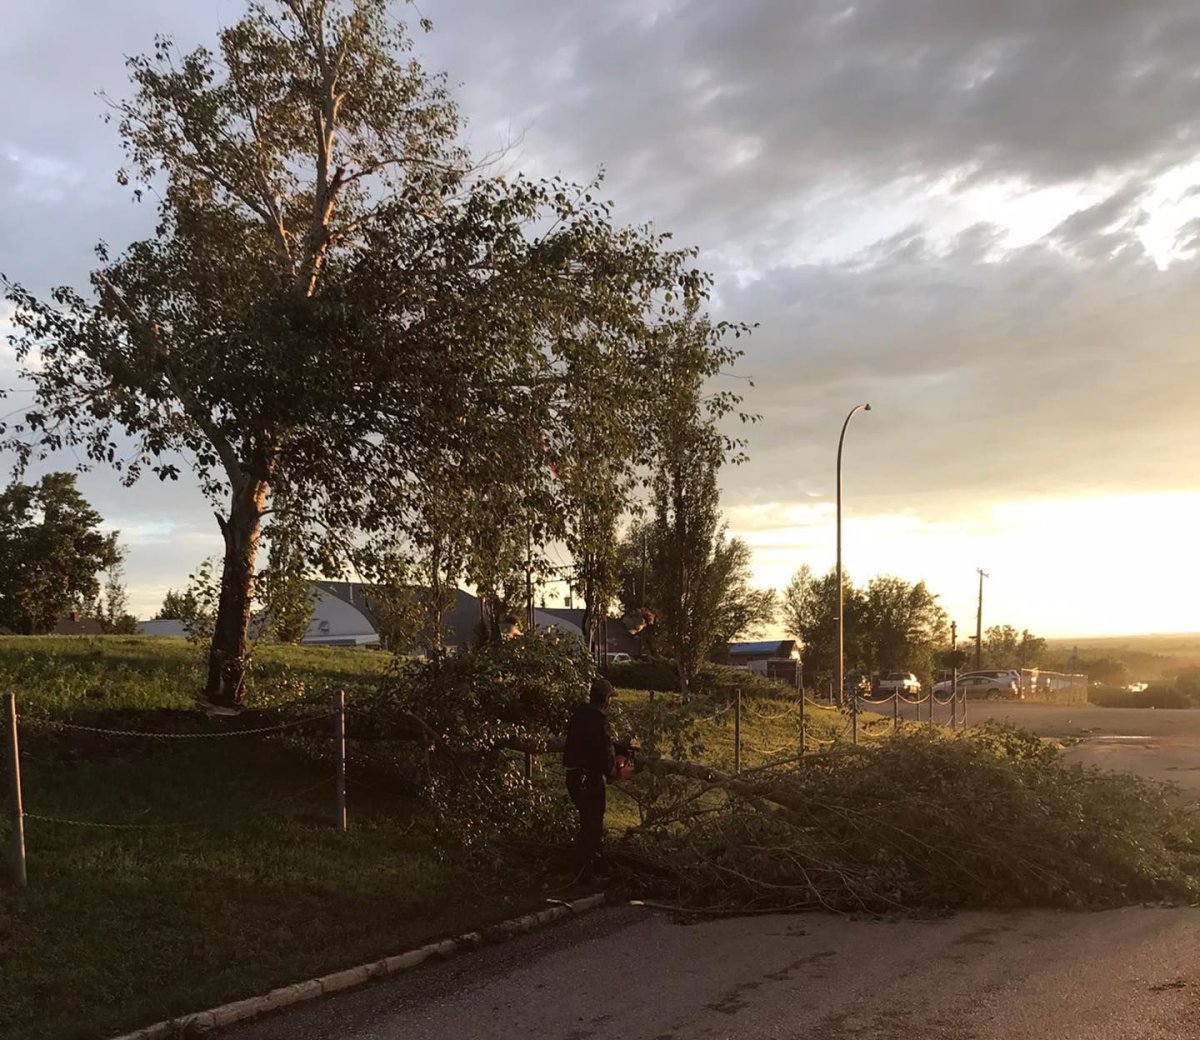 The storm rolled through Monday evening, as rain and wind hit the town of Kerrobert, Sask.